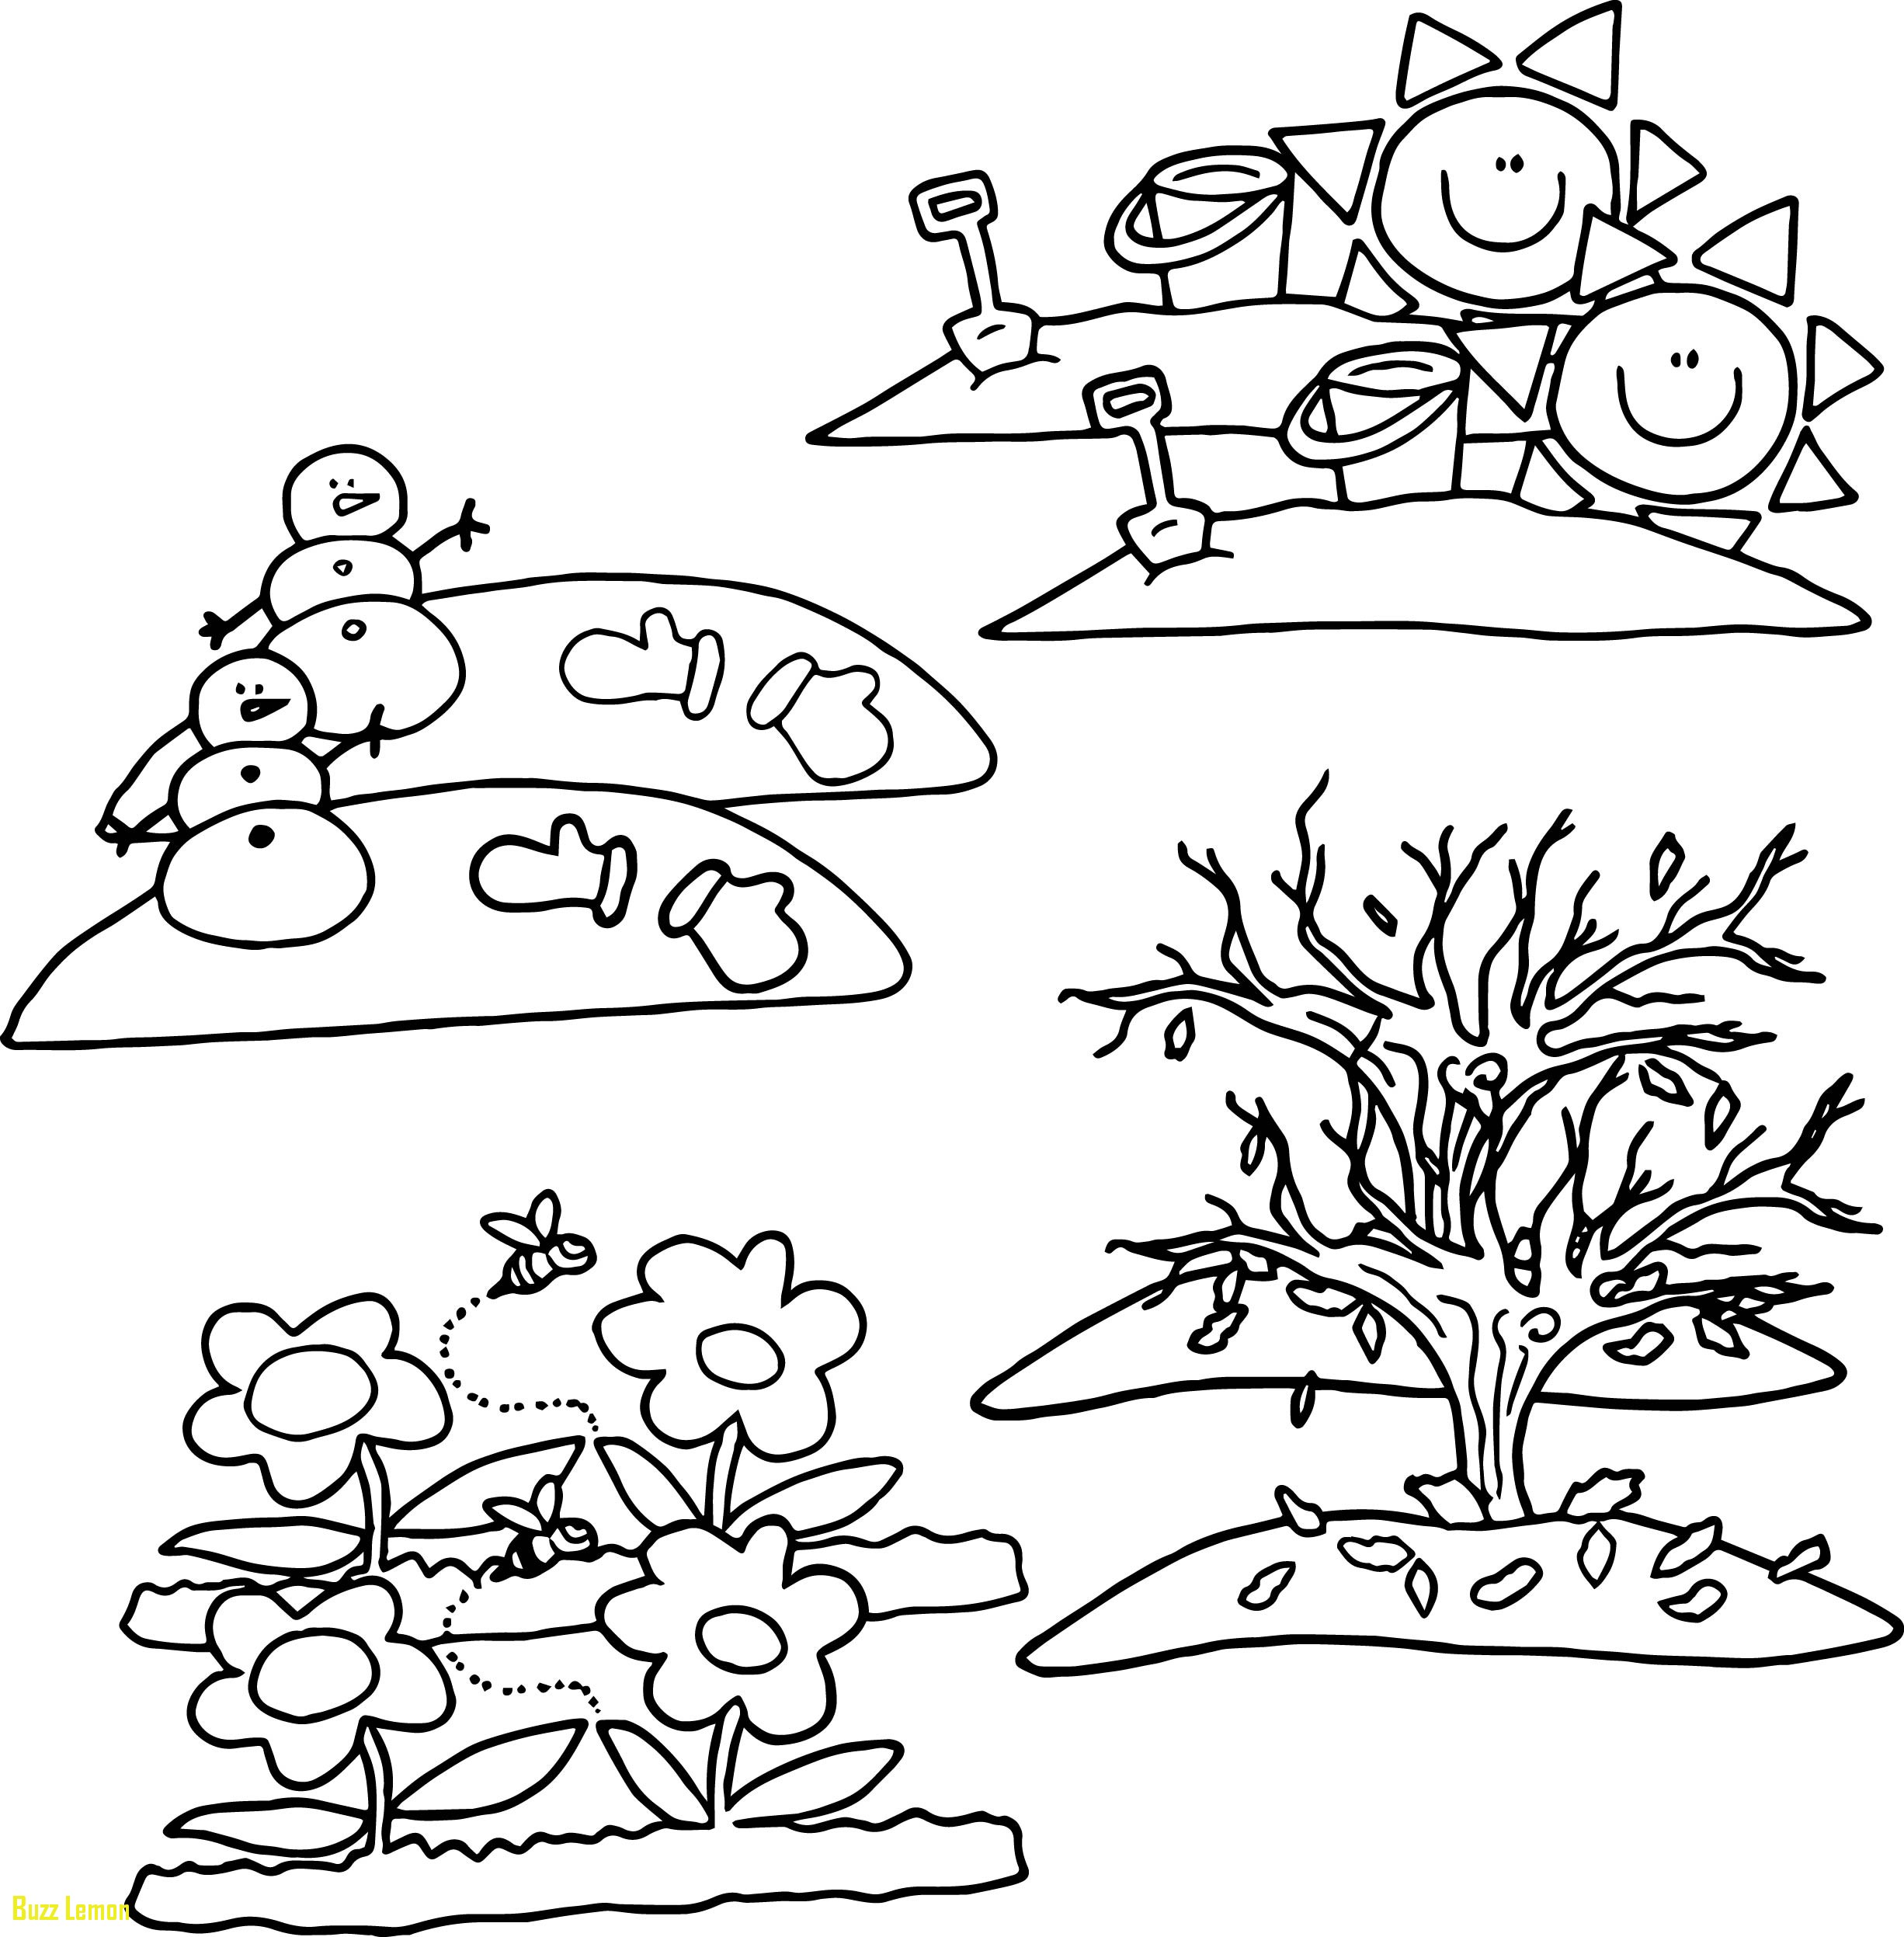 Four Seasons Coloring Page at GetDrawings | Free download